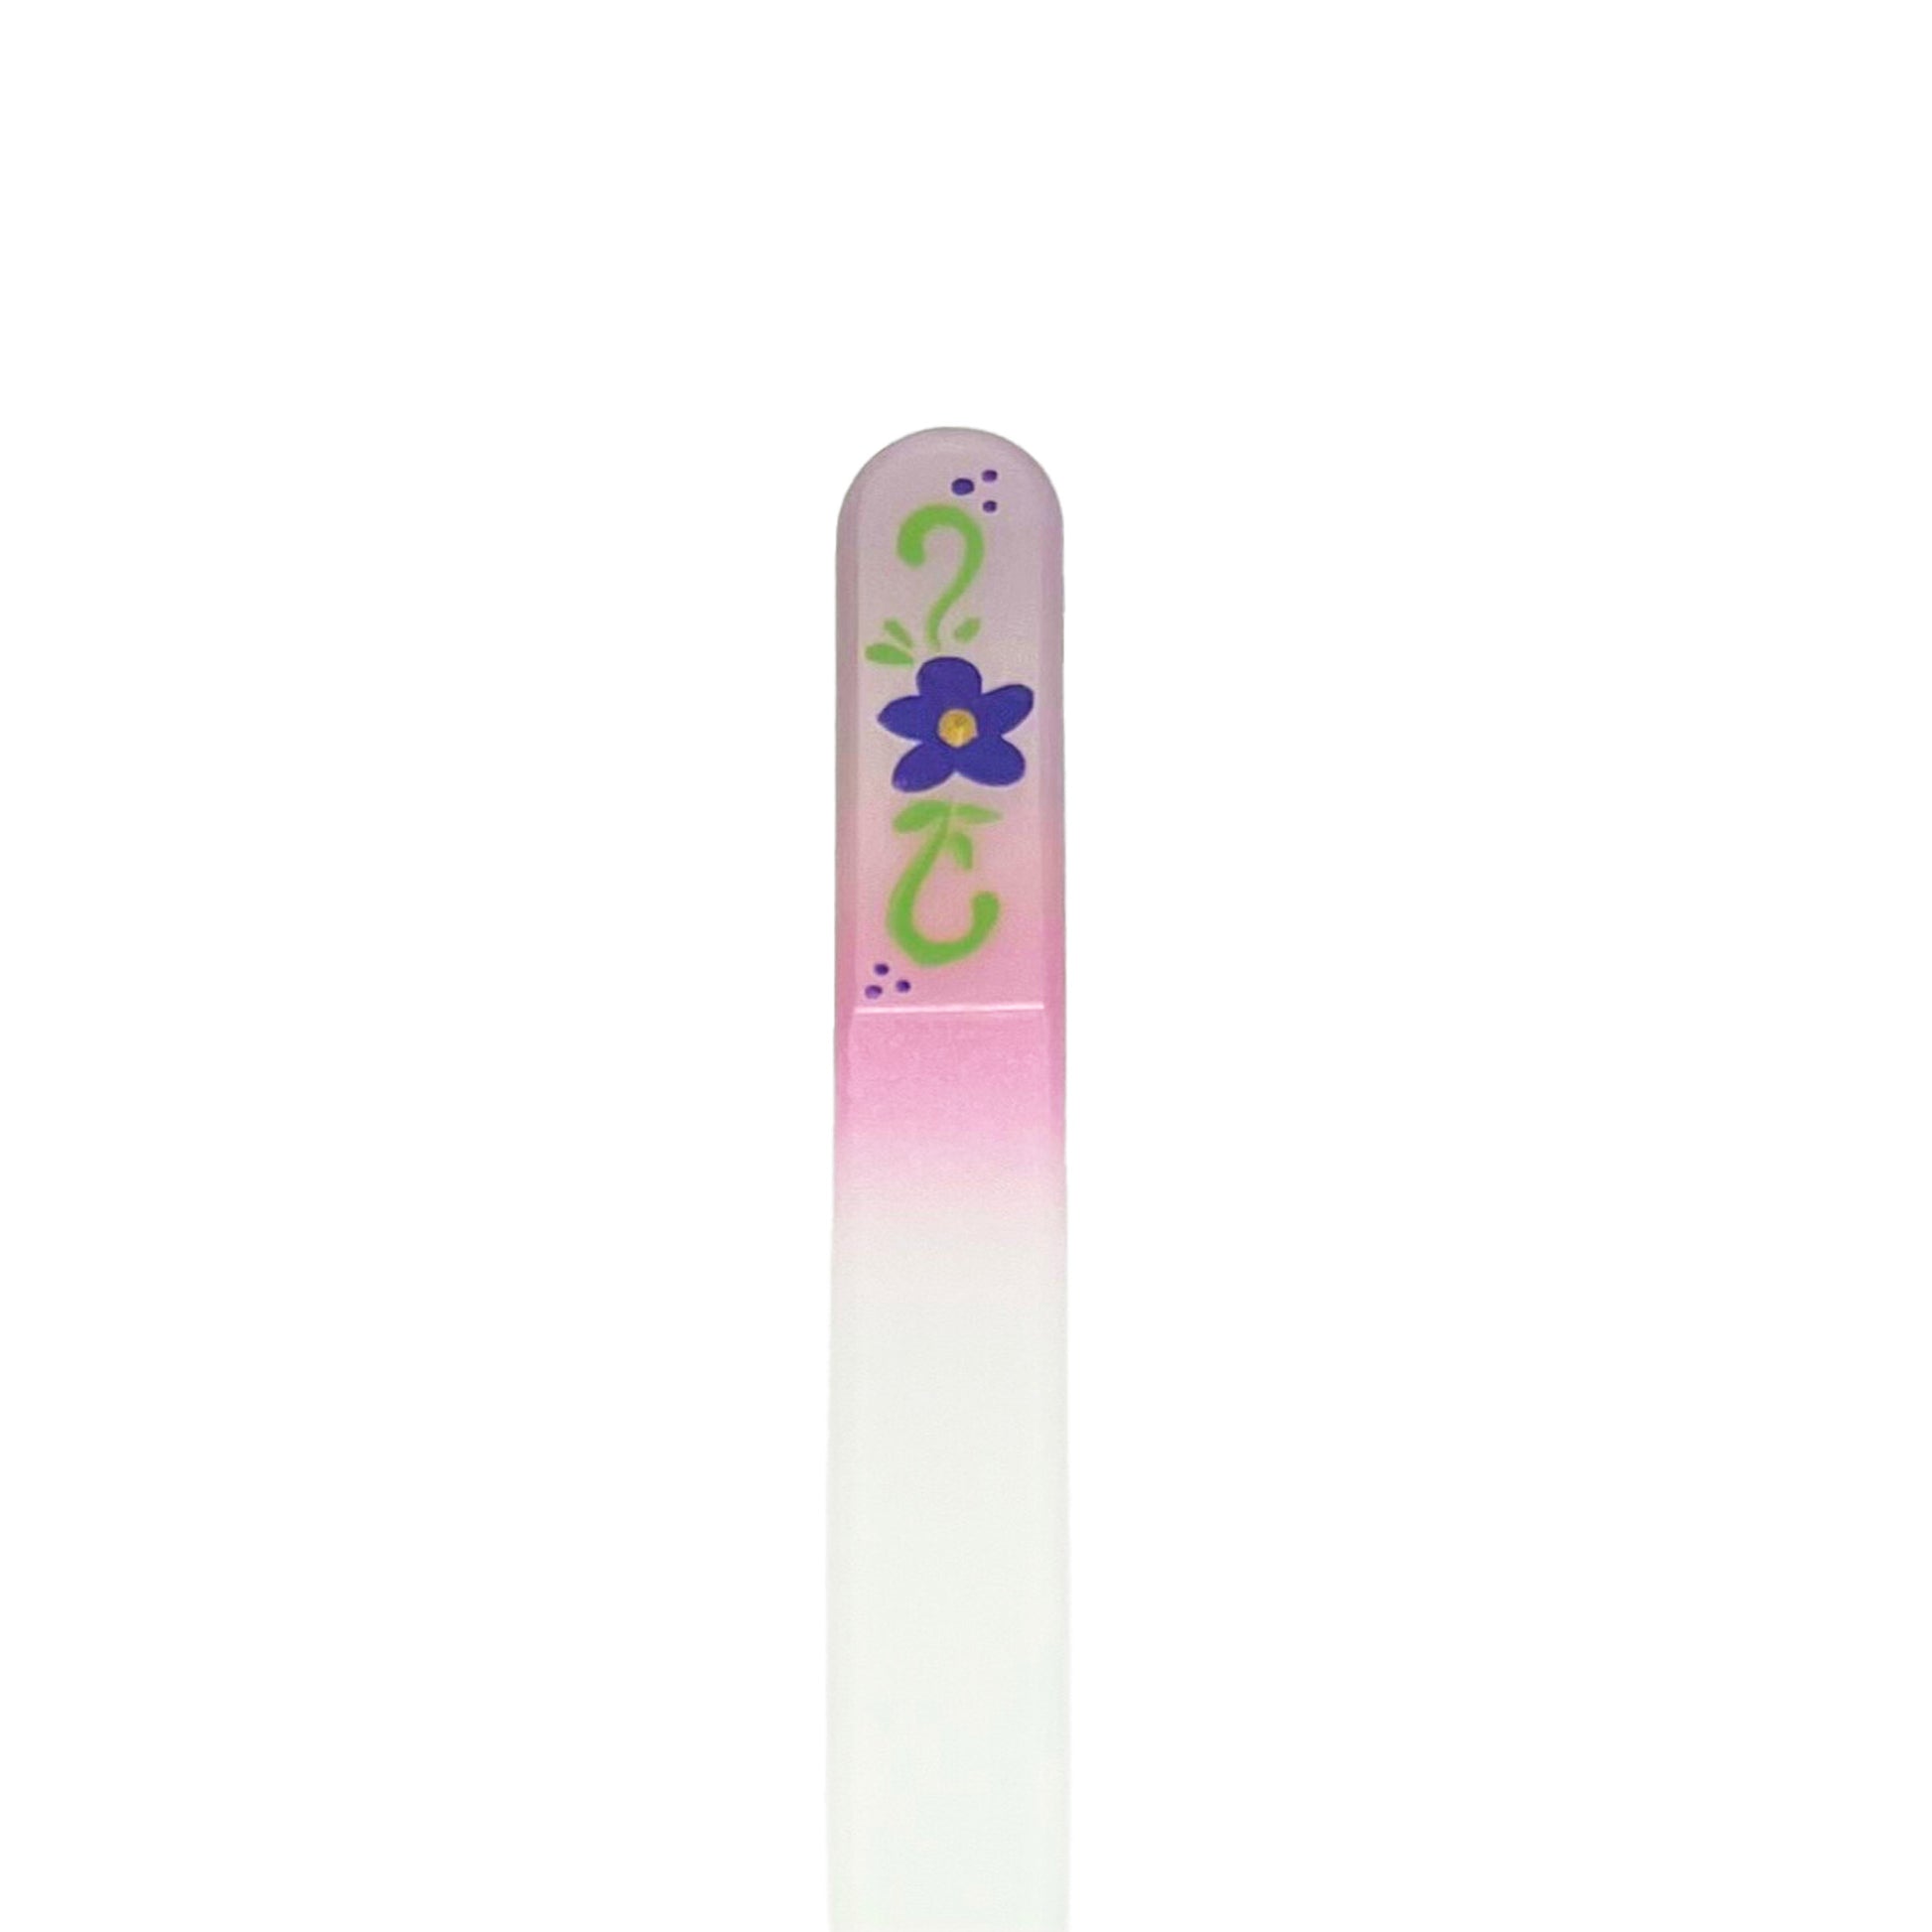 Light purple and pink glass nail file with hand painted purple flower.